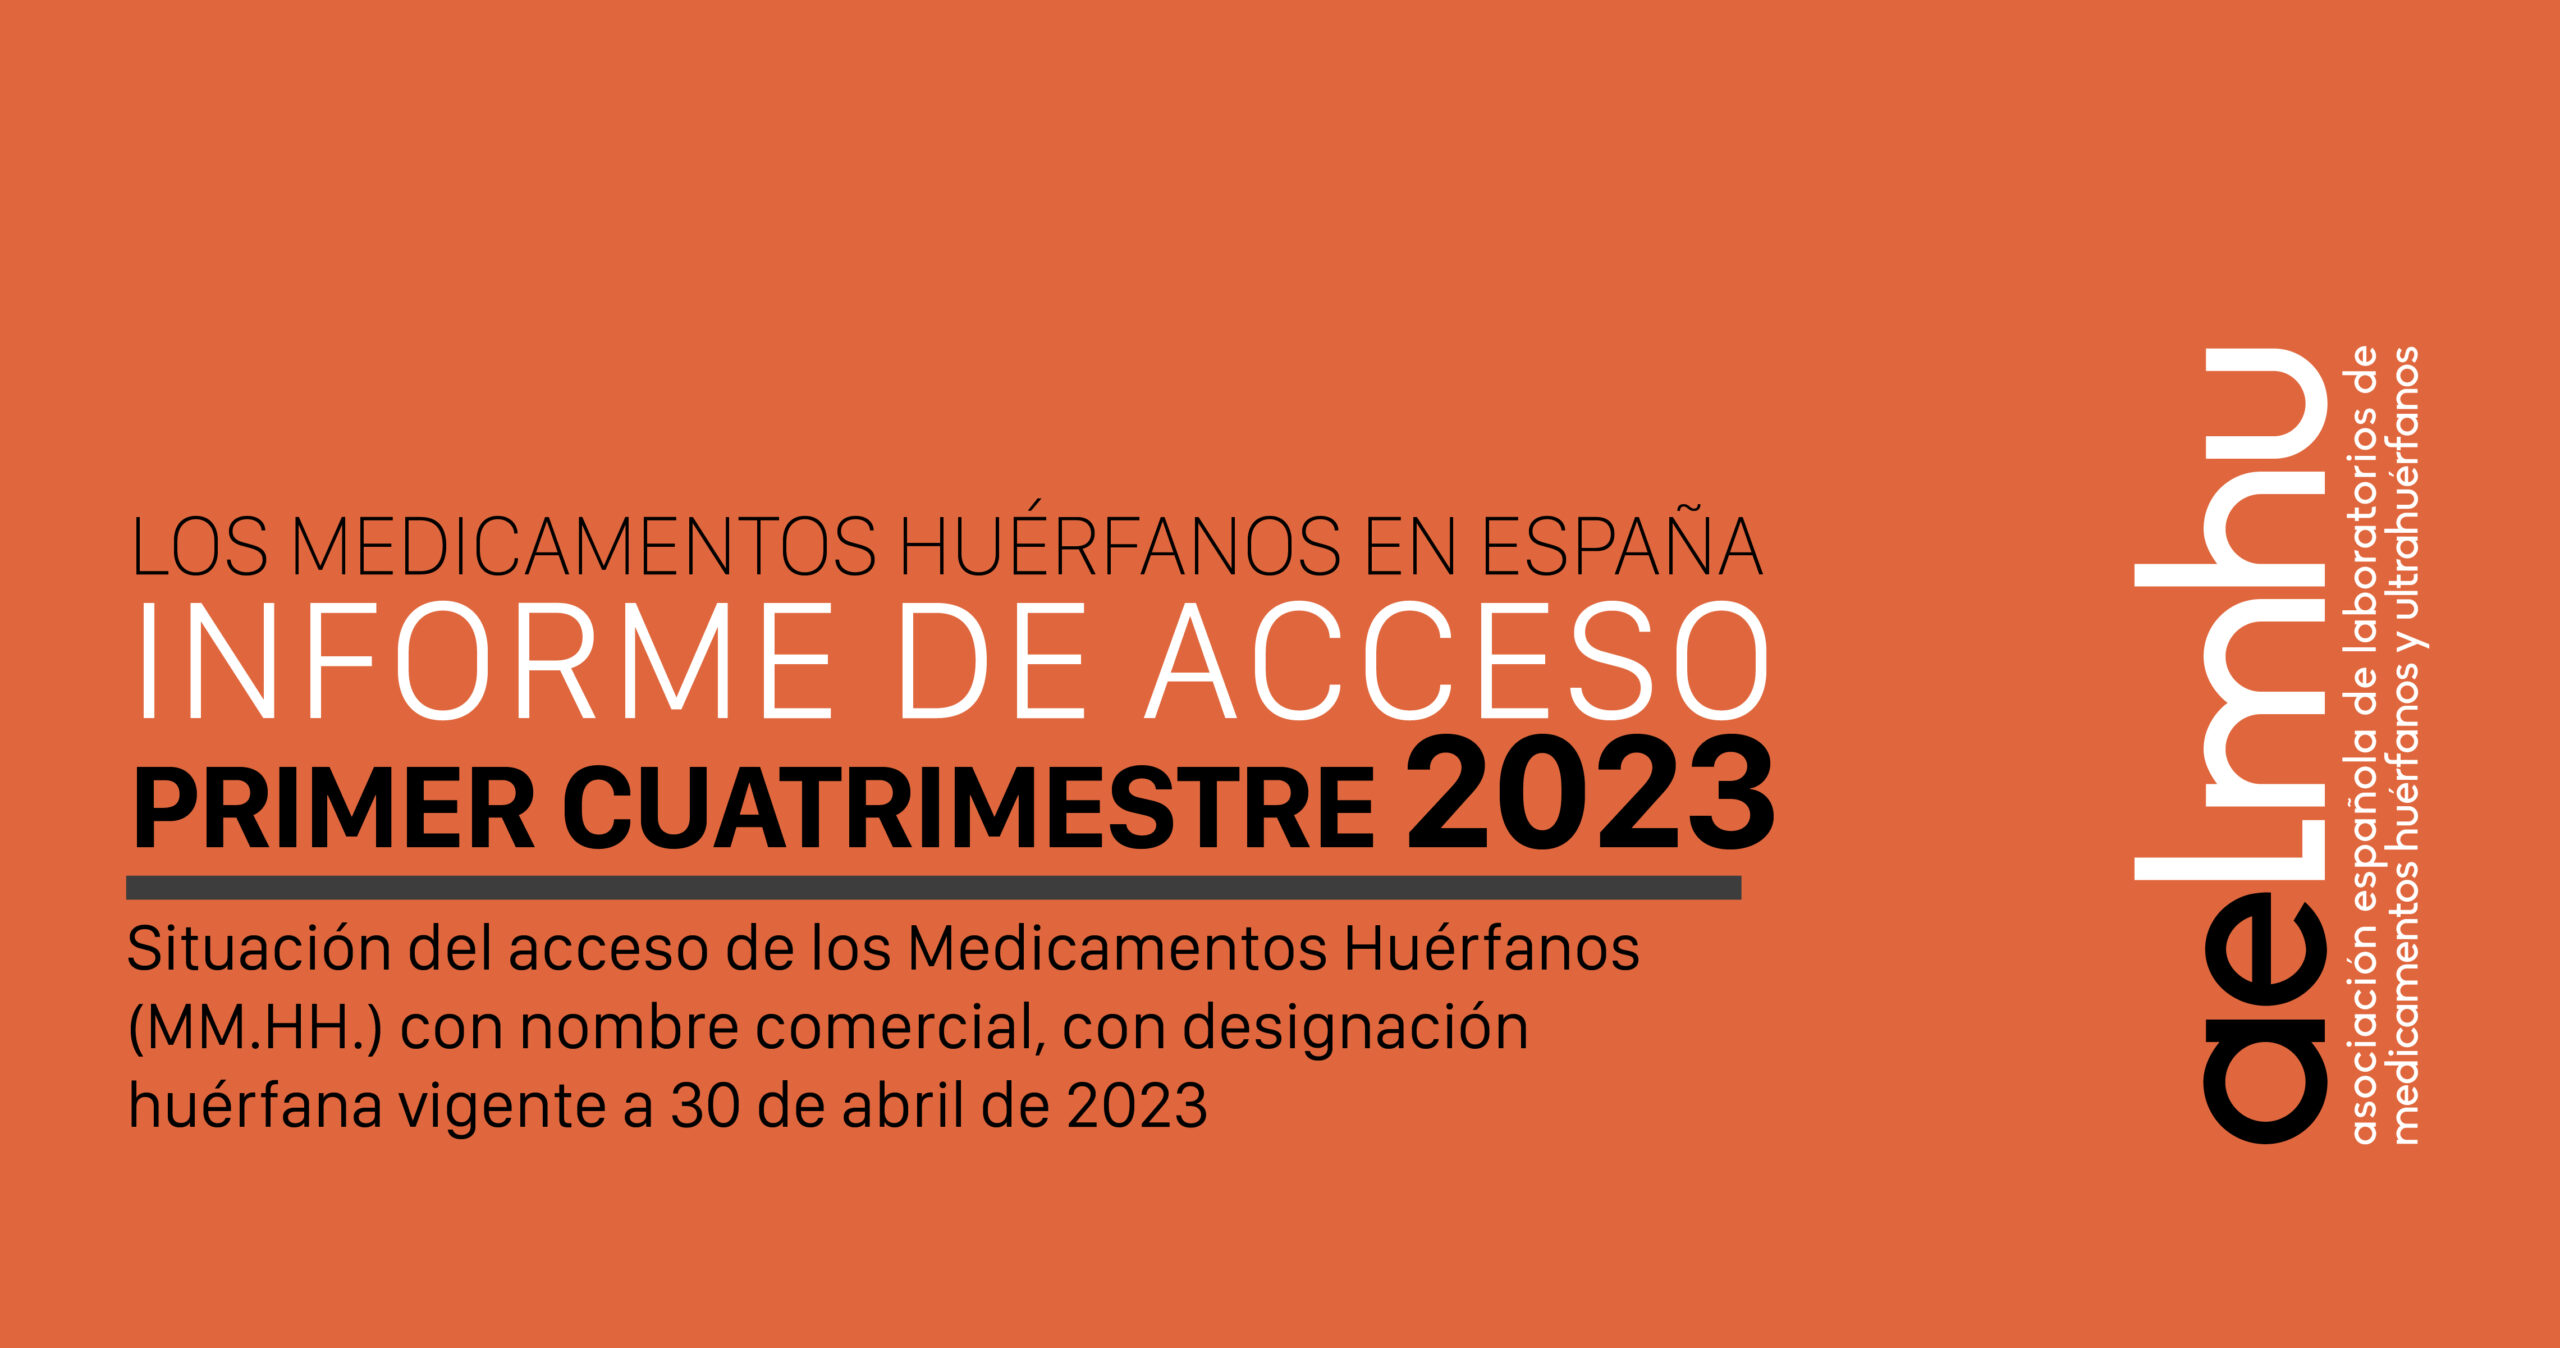 First quarterly access report 2023 for orphan drugs